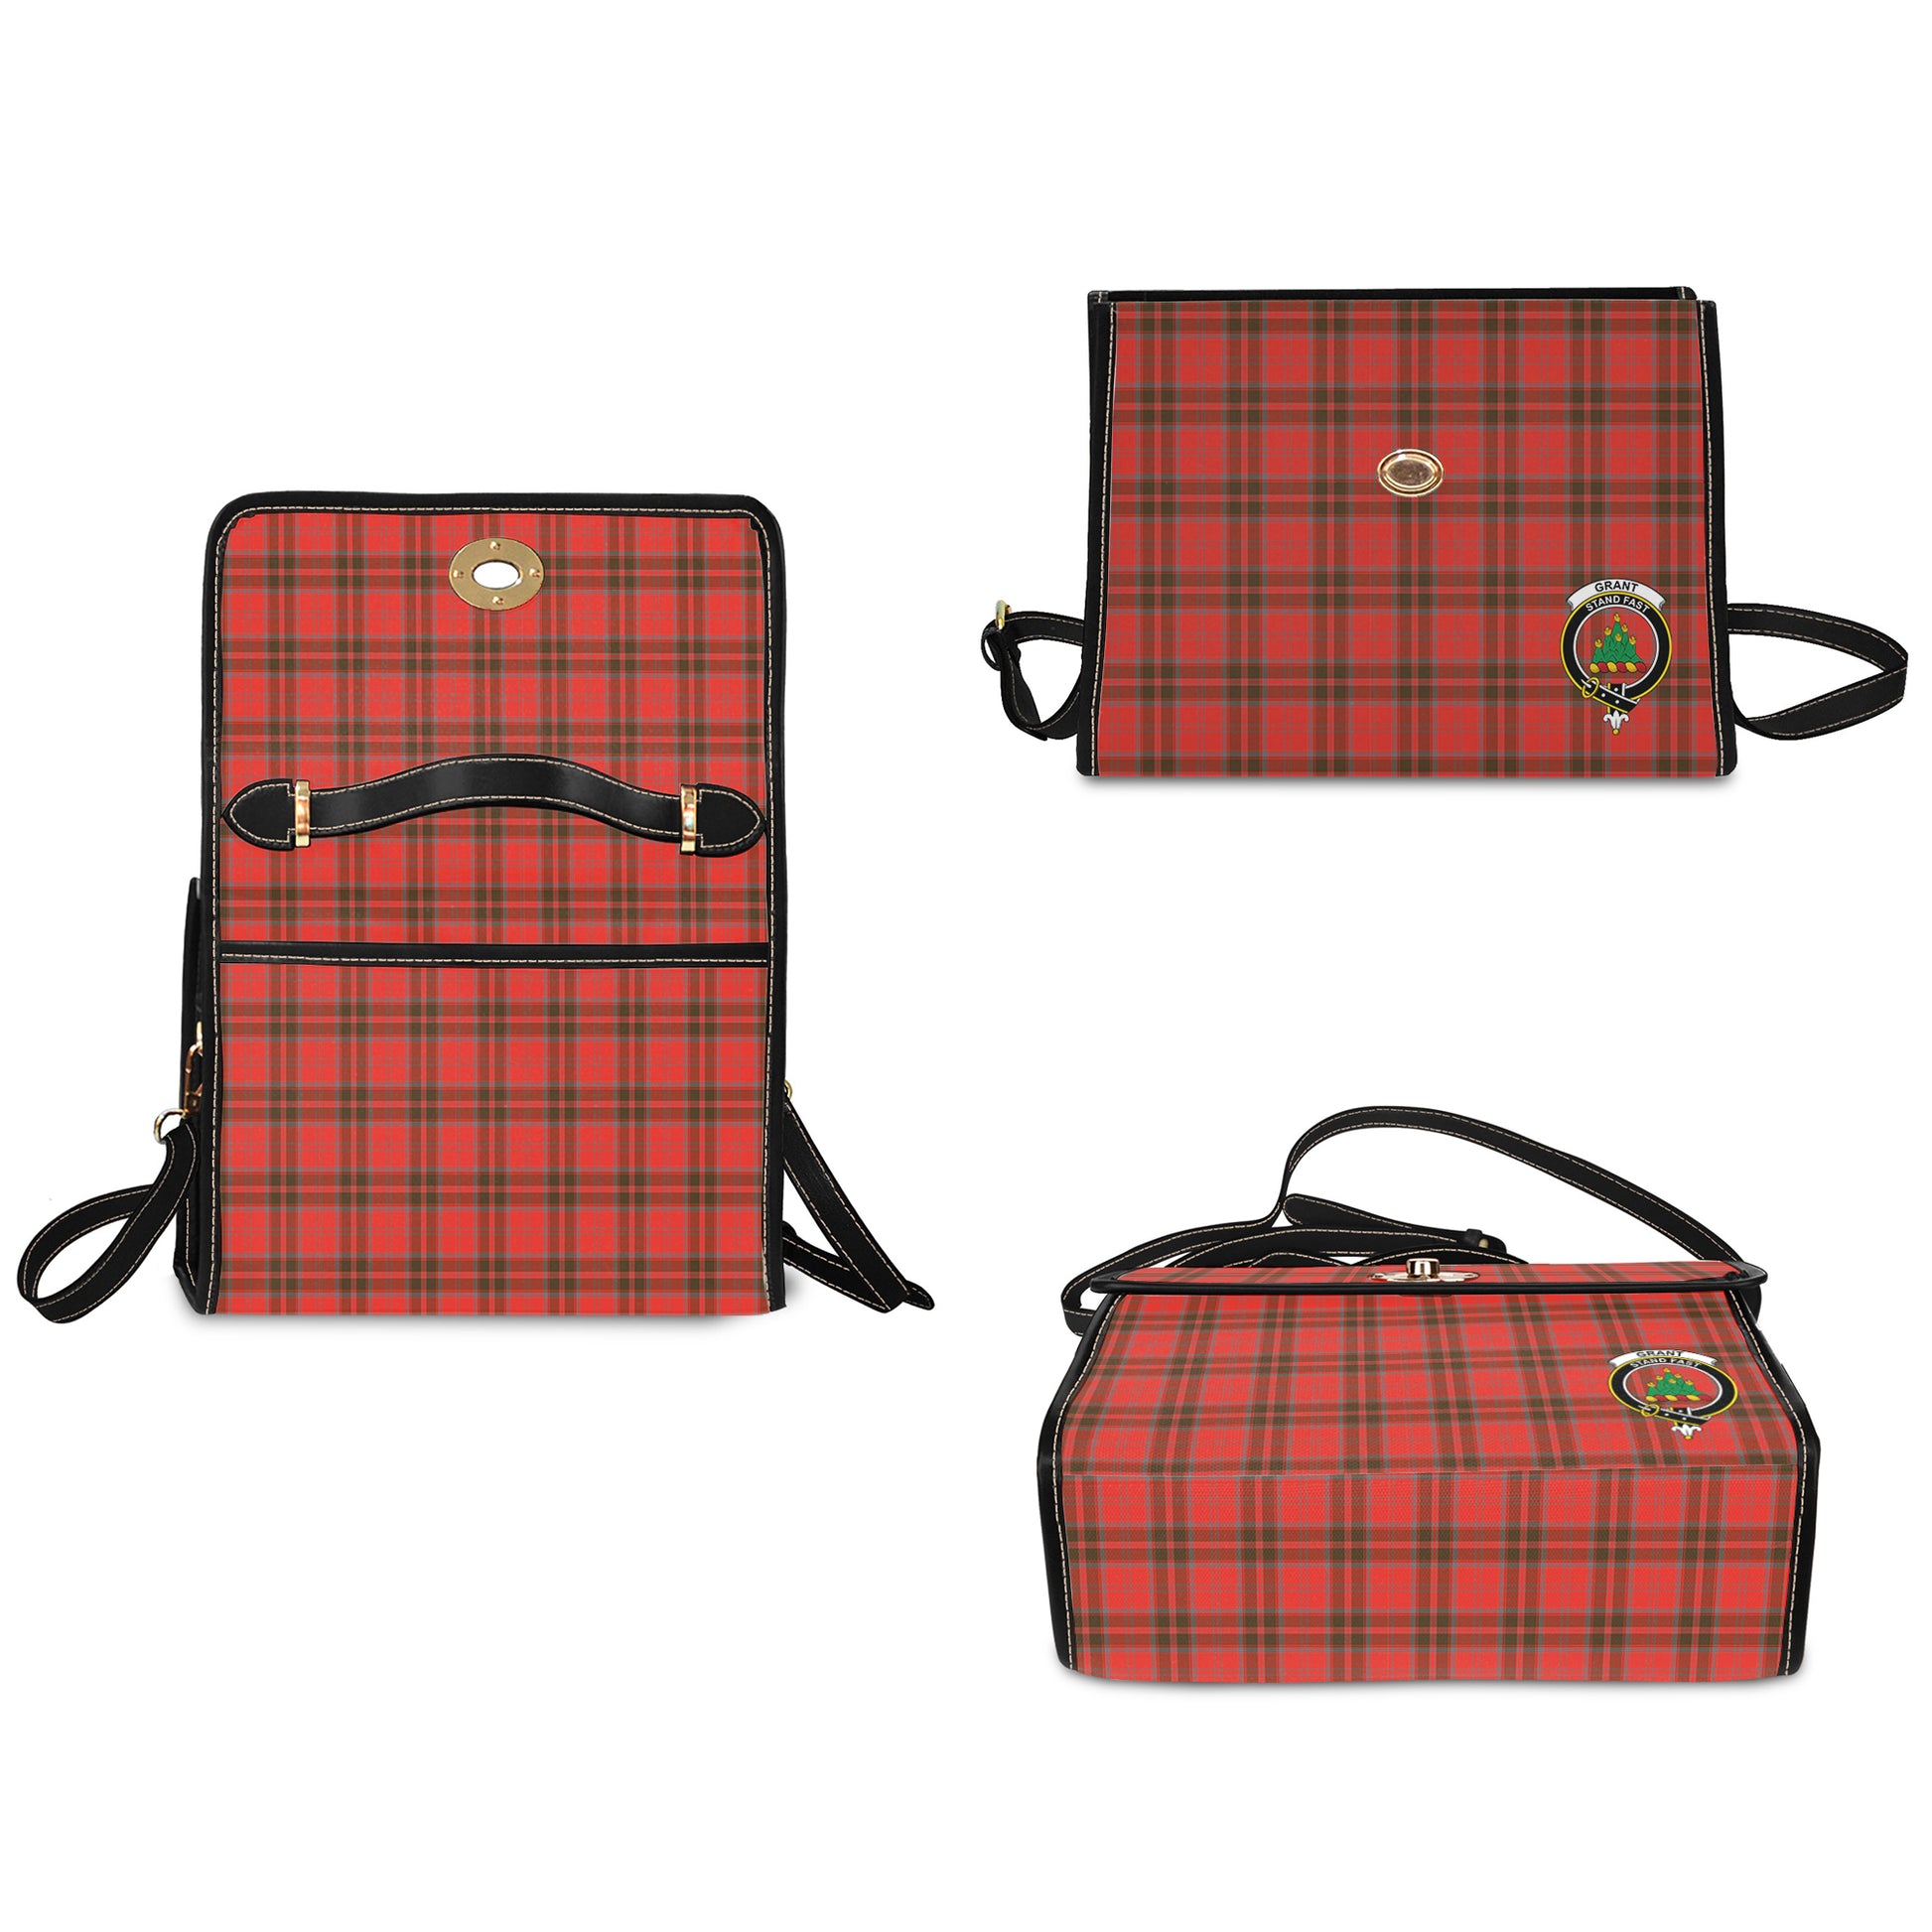 grant-weathered-tartan-leather-strap-waterproof-canvas-bag-with-family-crest